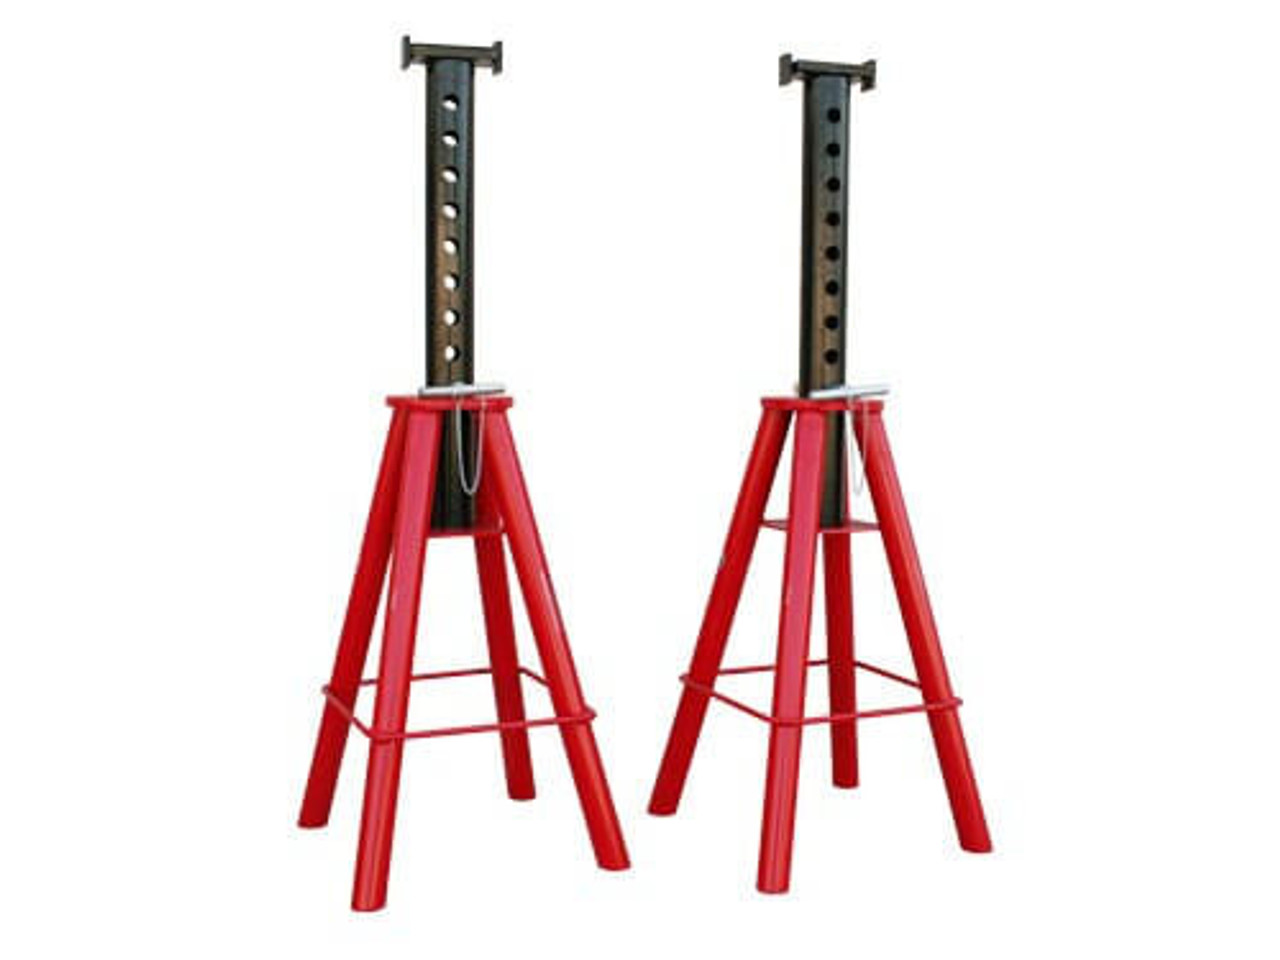 Tall Jack Stand - 10 Ton Capacity (Set of 2)